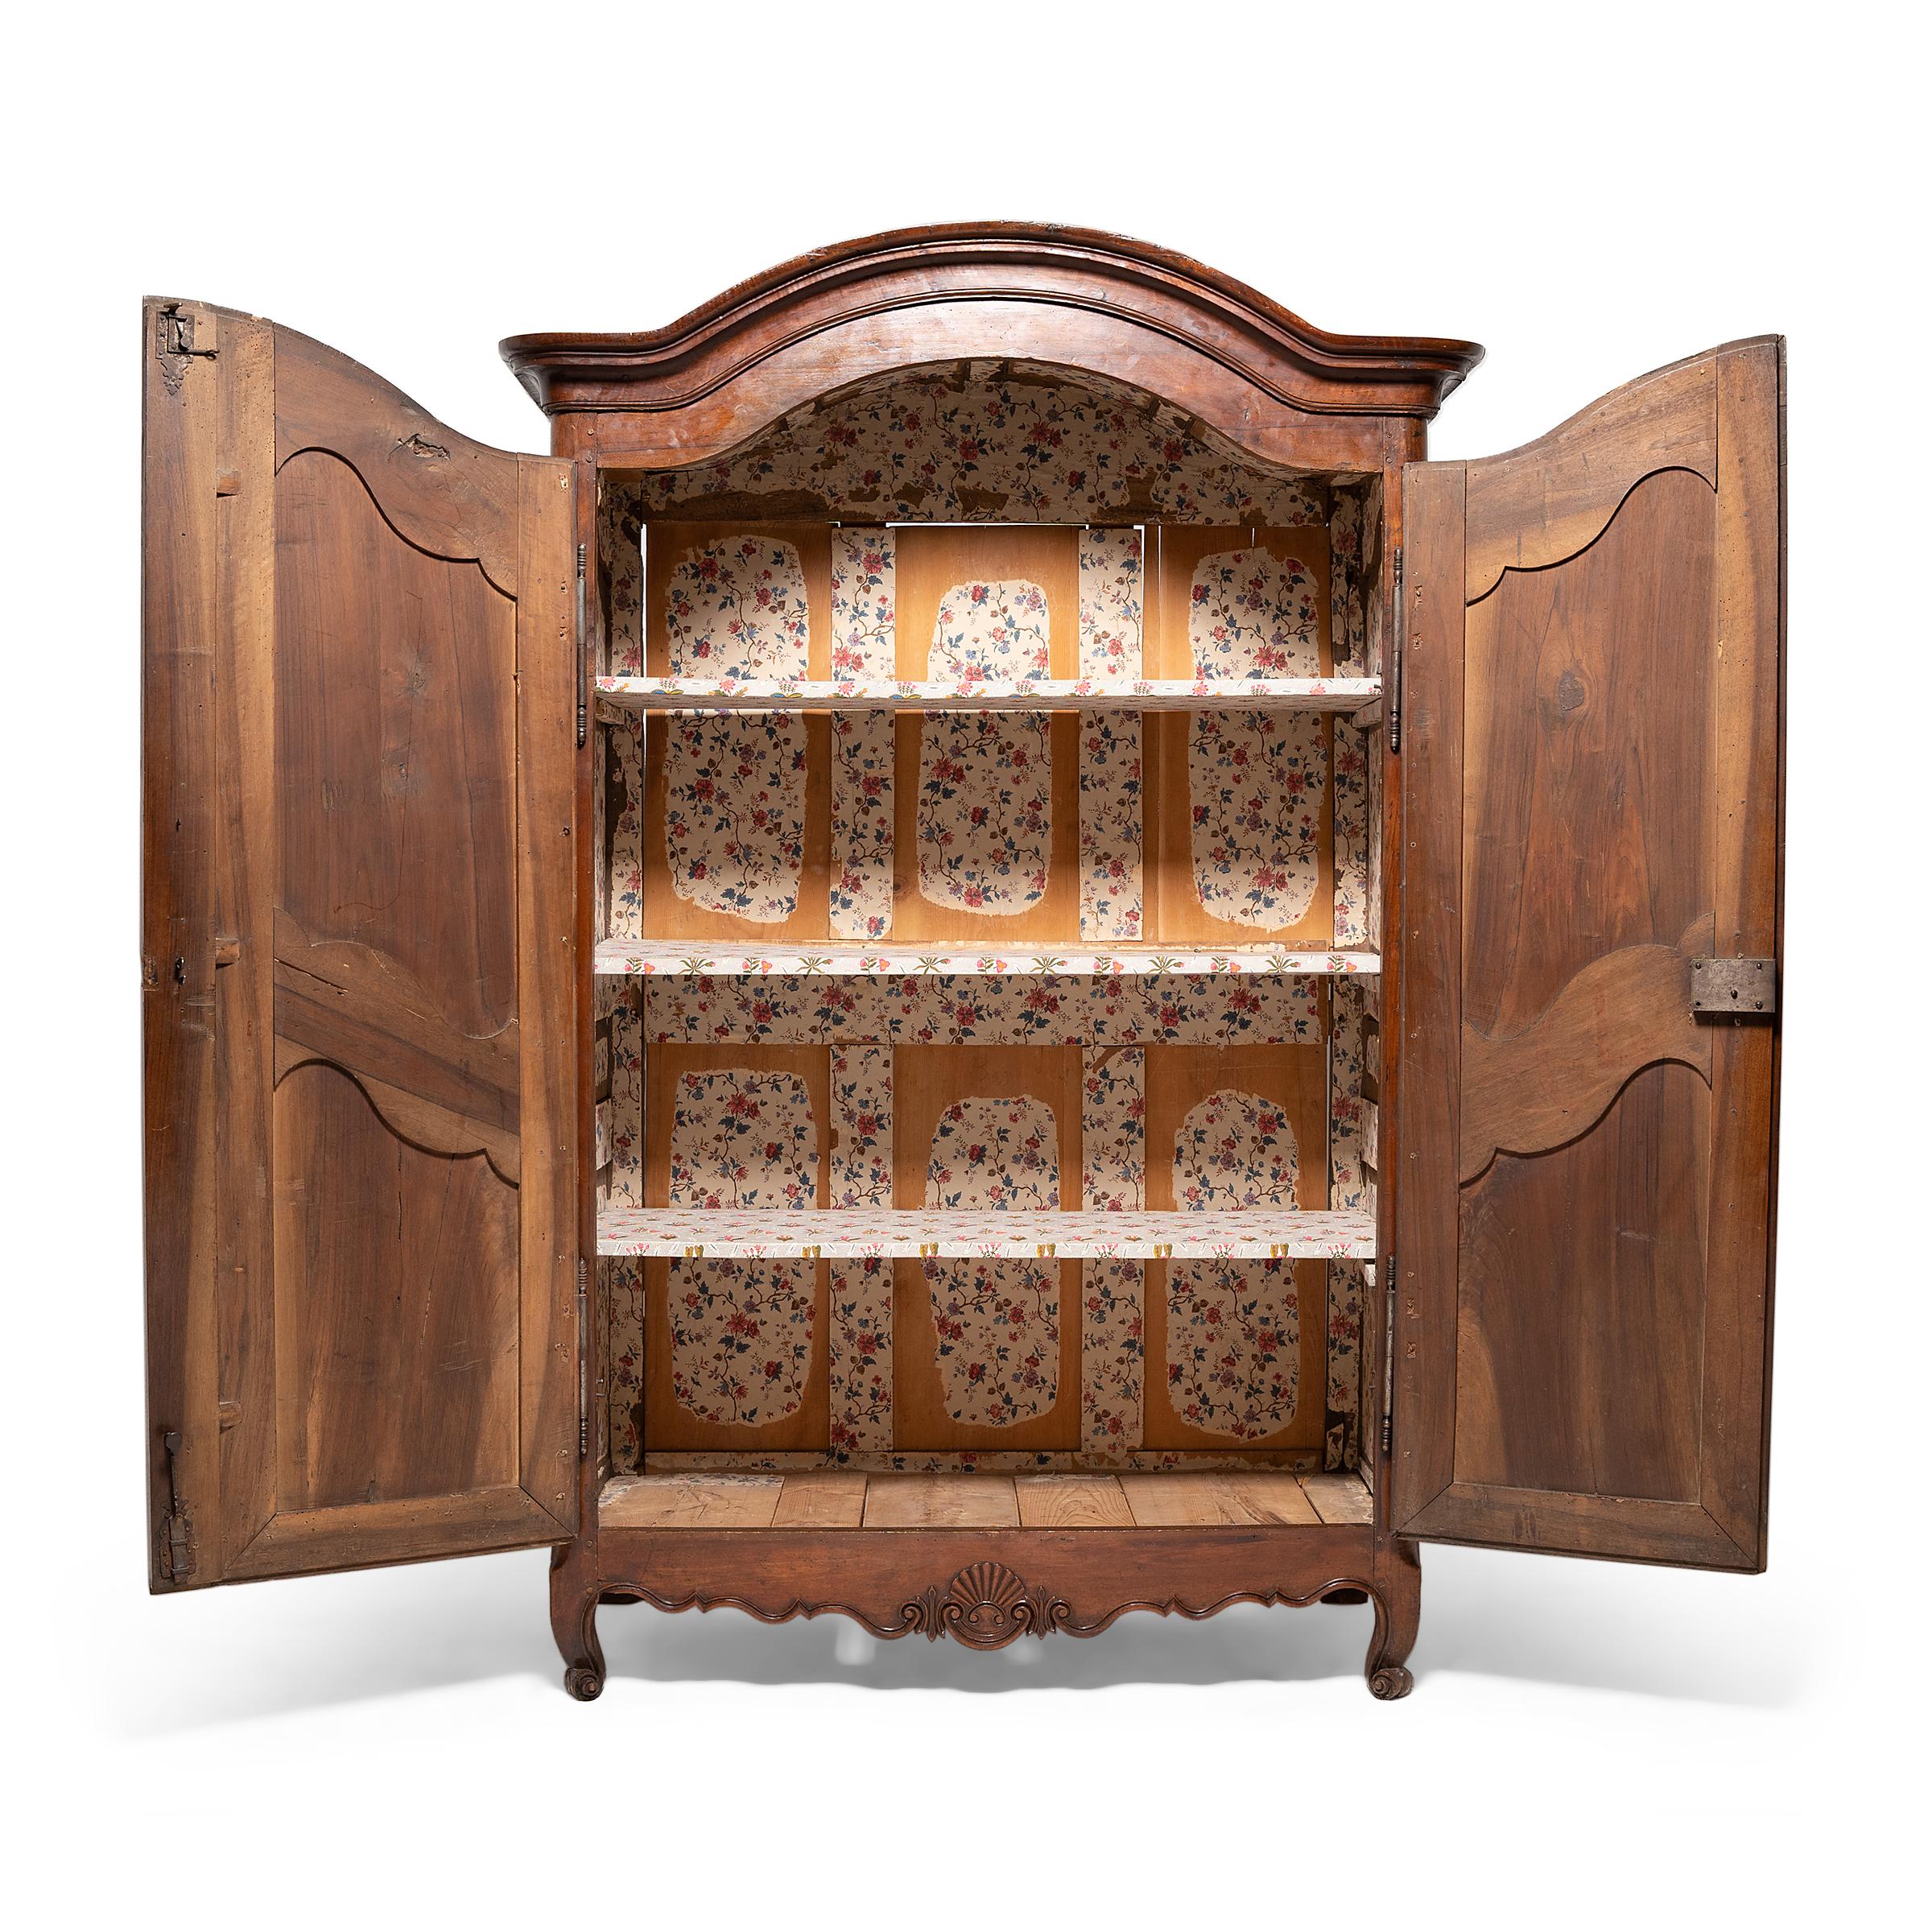 French Provincial Armoire with Arched Top, circa 1750 In Good Condition For Sale In Chicago, IL